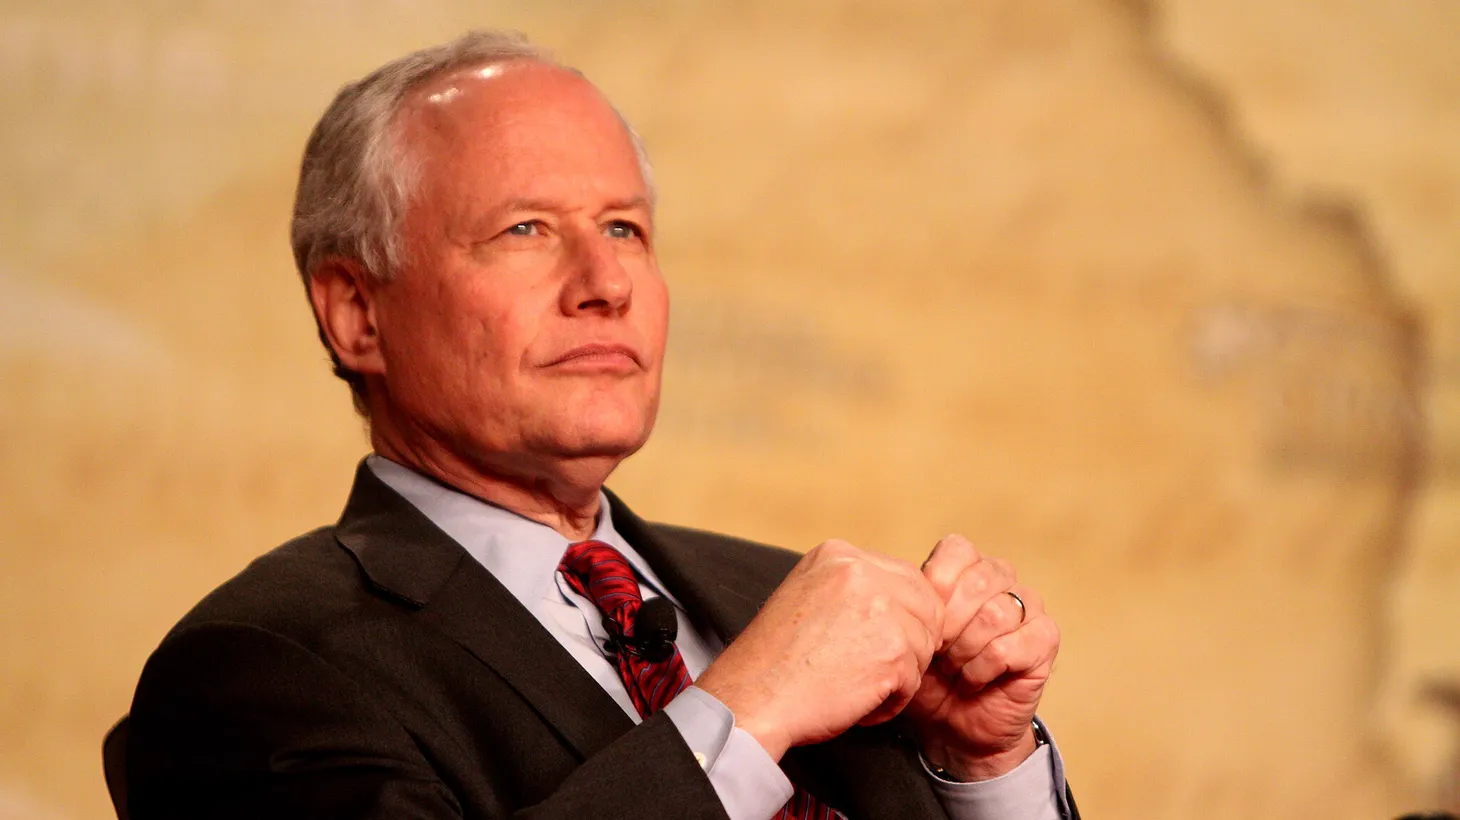 Bill Kristol, veteran political analyst, commentator and editor-at-large of The Bulwark attends CPAC FL in Orlando, Florida, on September 23, 2011.